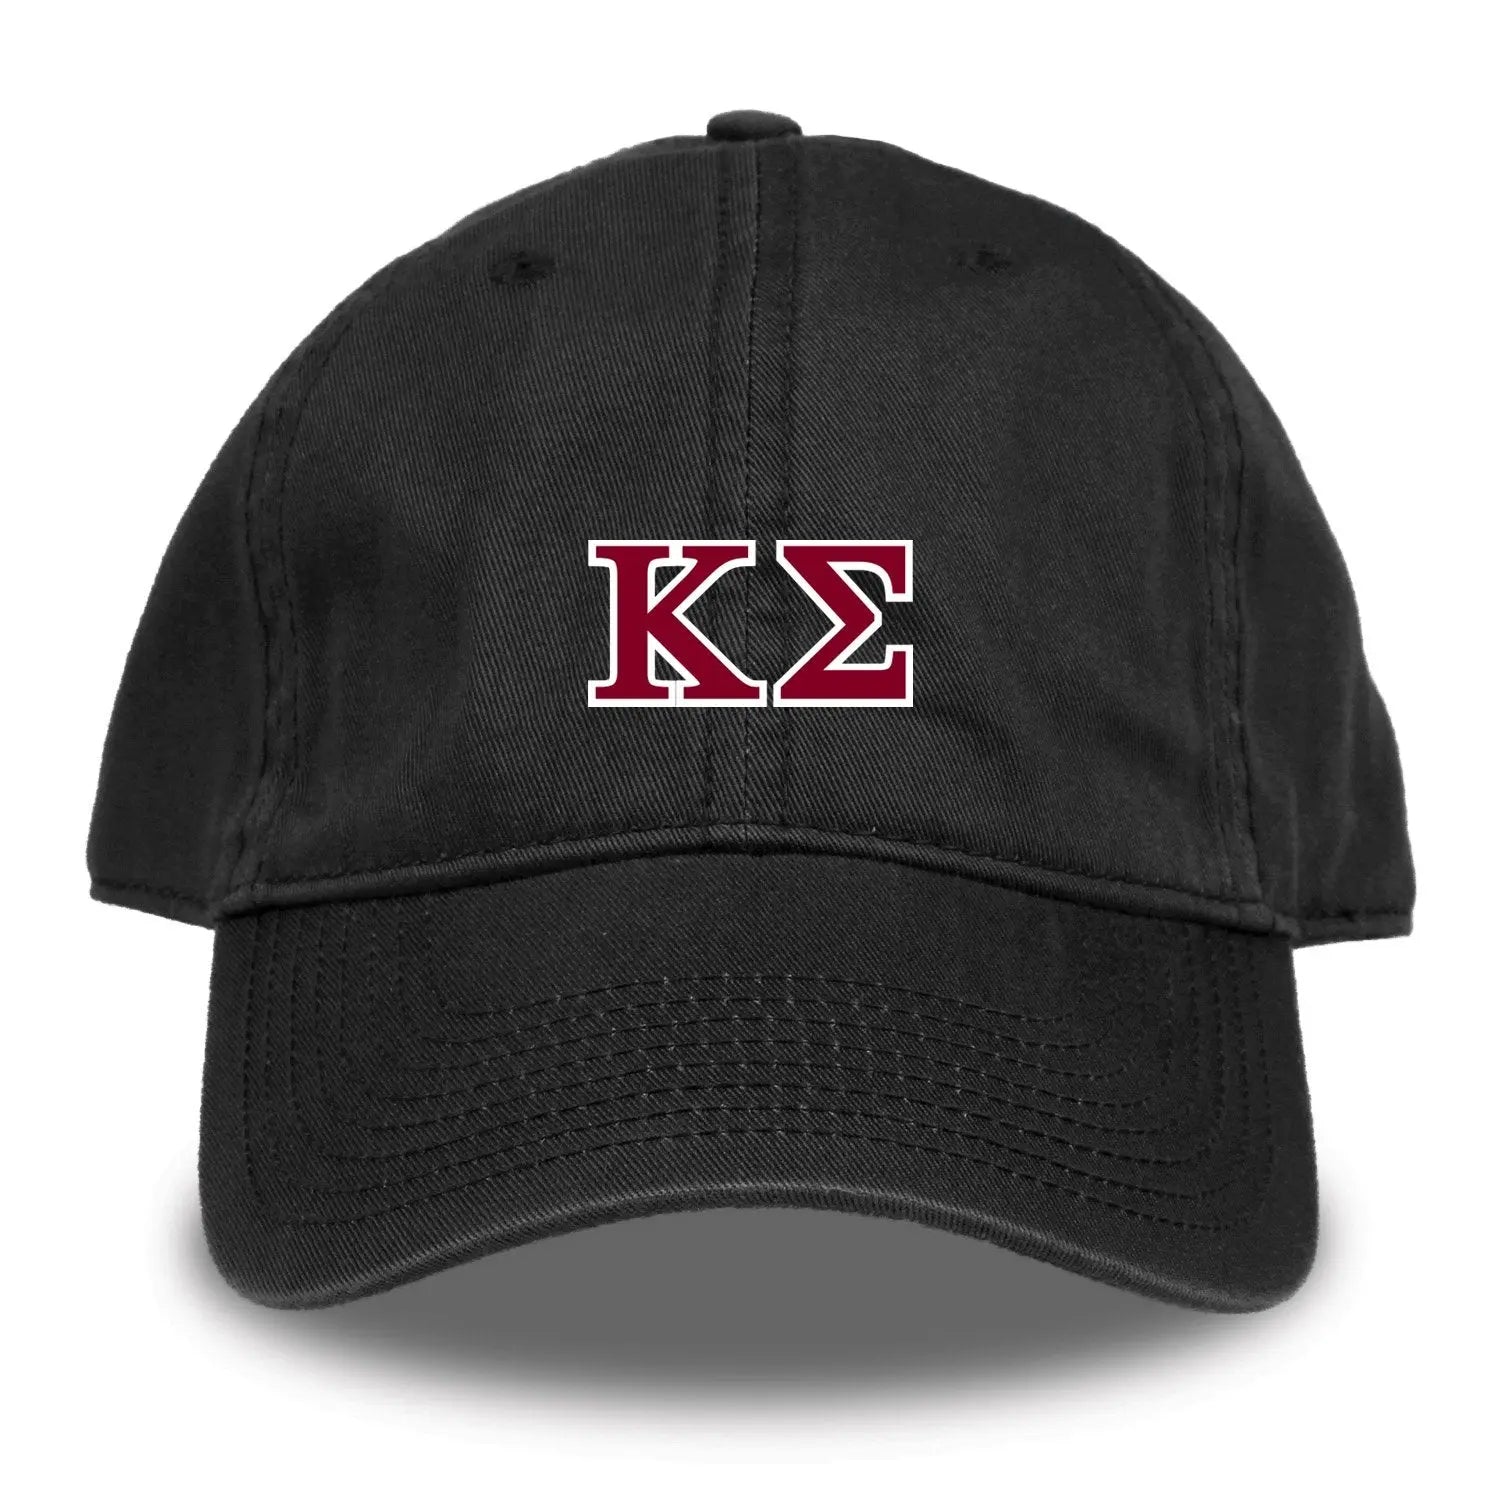 Kappa Sig Black Hat by – Kappa Official Game The Sigma Store